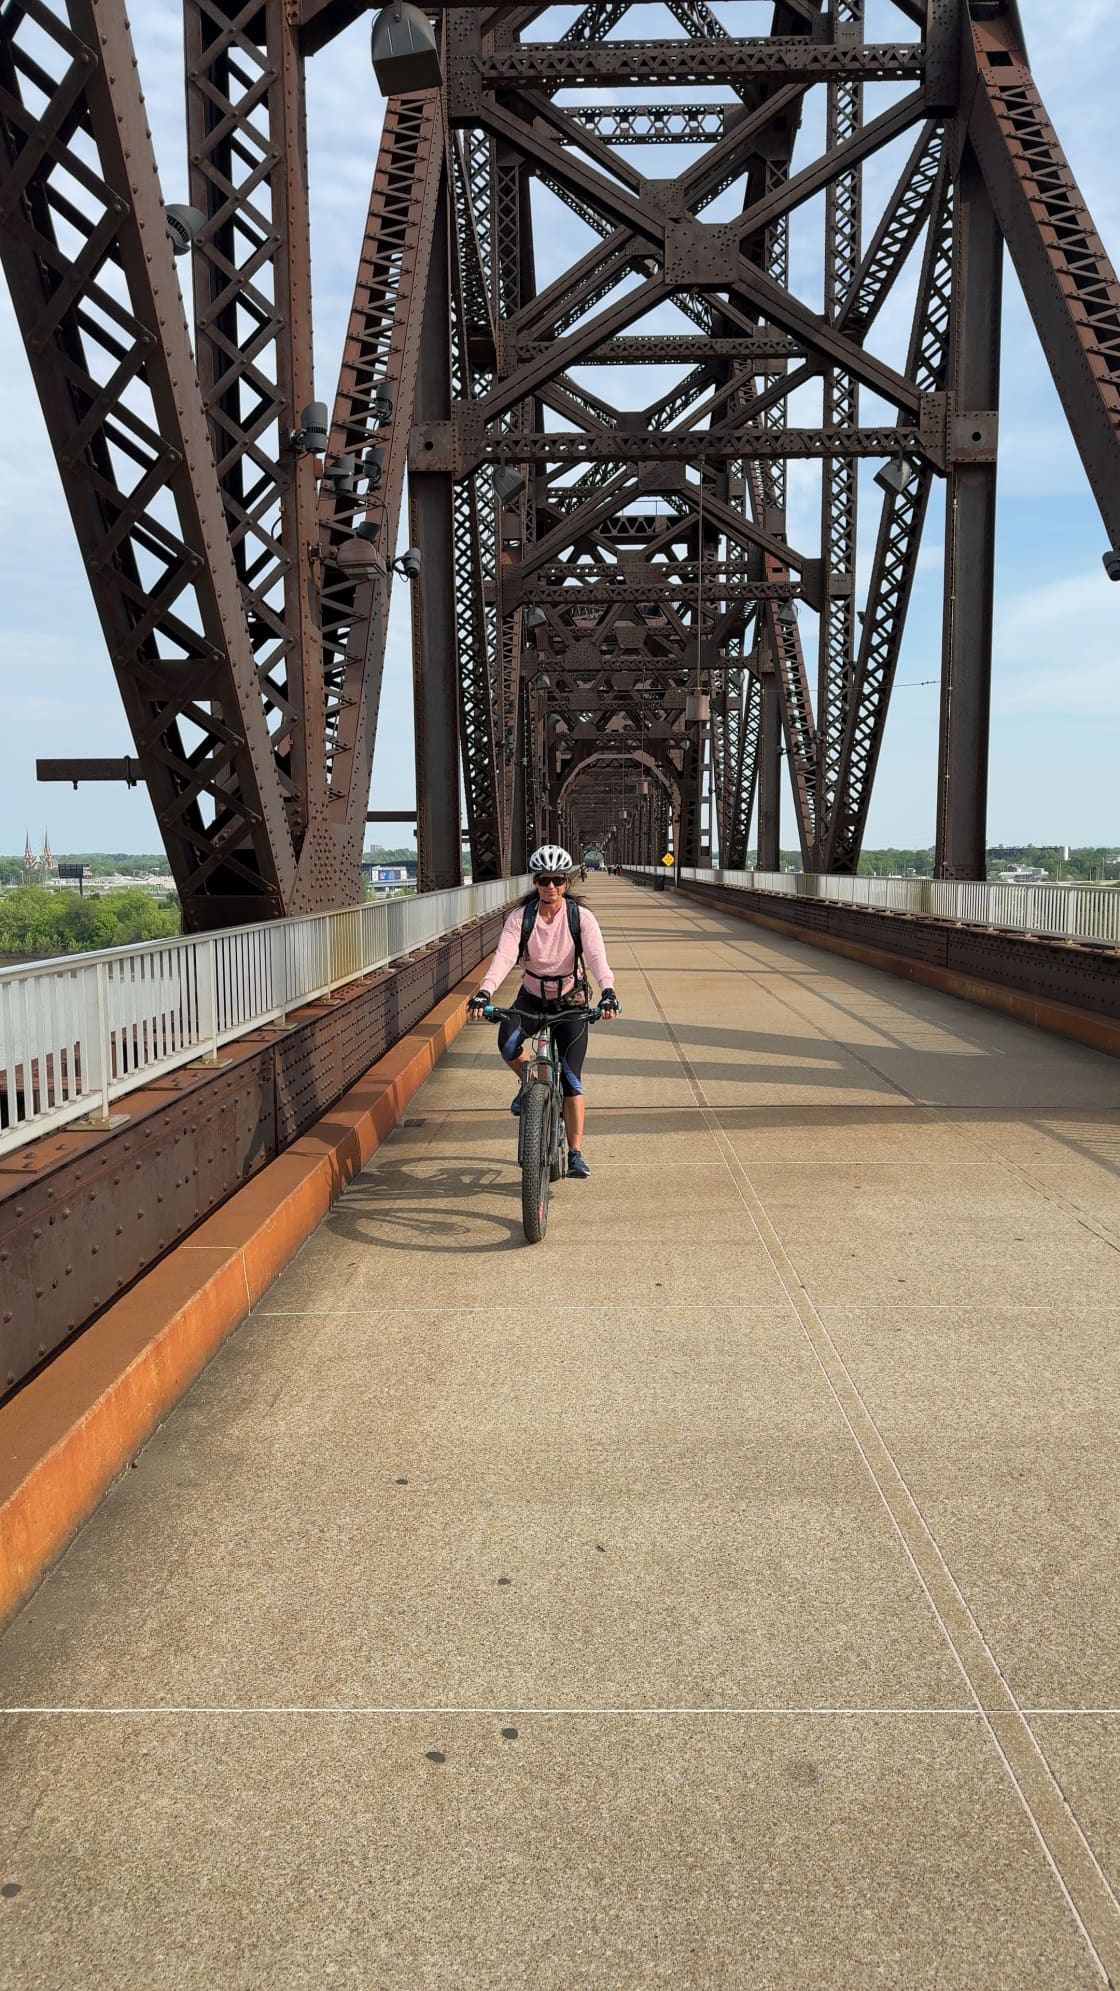 Pedestrian and Bike bridge over the Ohio river very close by